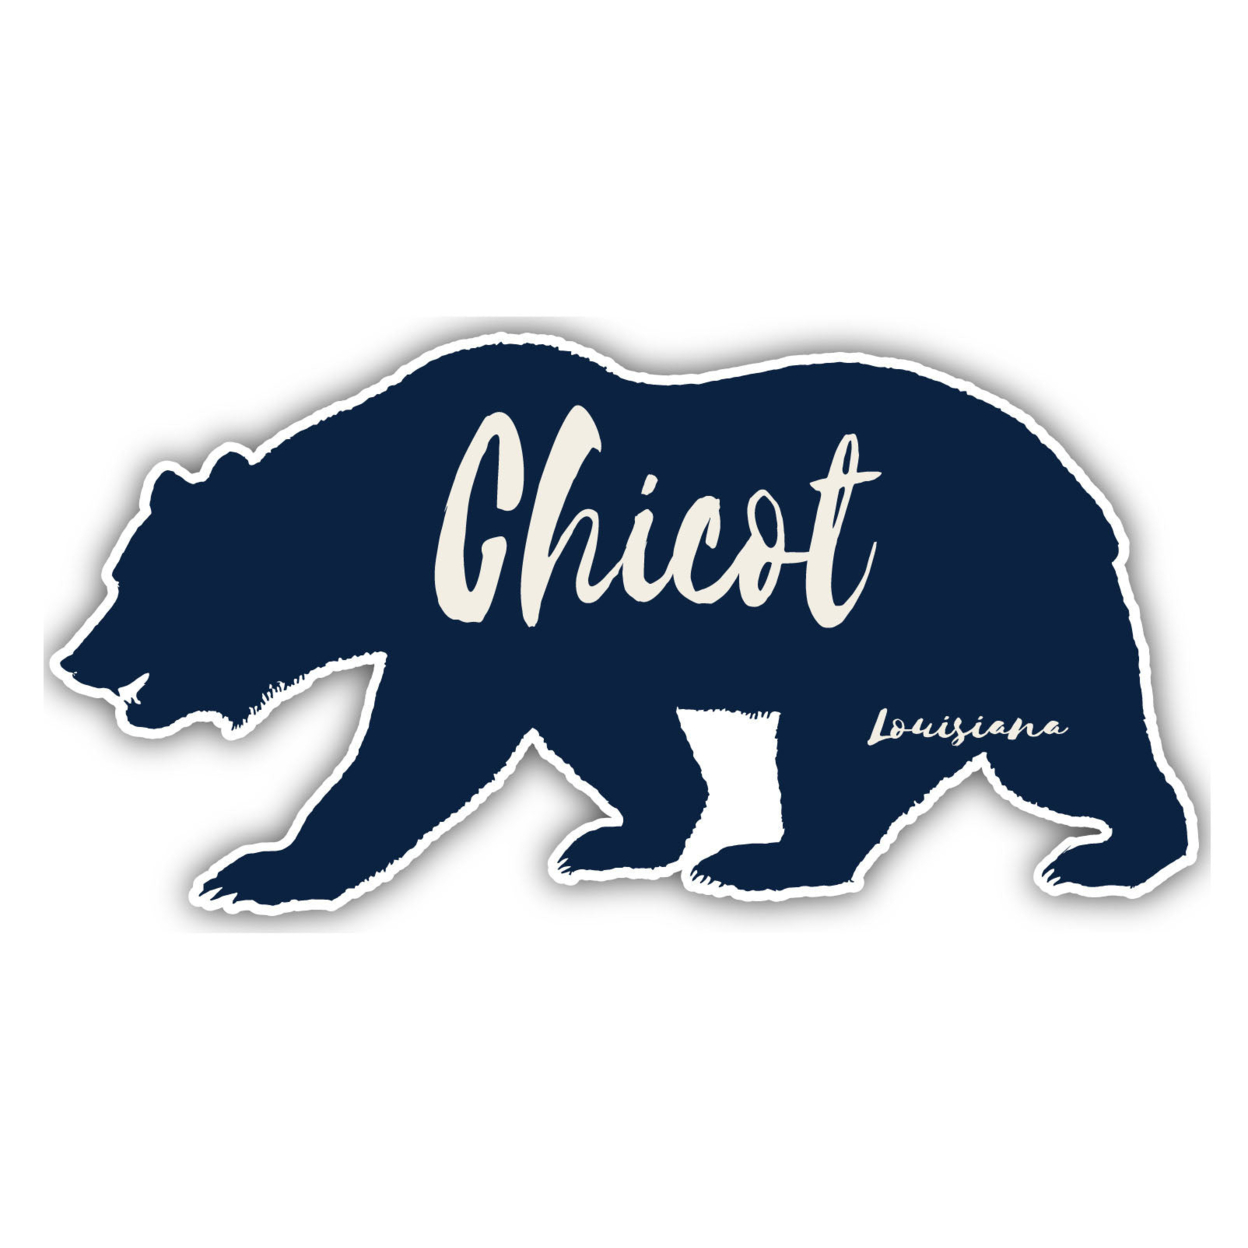 Chicot Louisiana Souvenir Decorative Stickers (Choose Theme And Size) - 4-Pack, 8-Inch, Bear